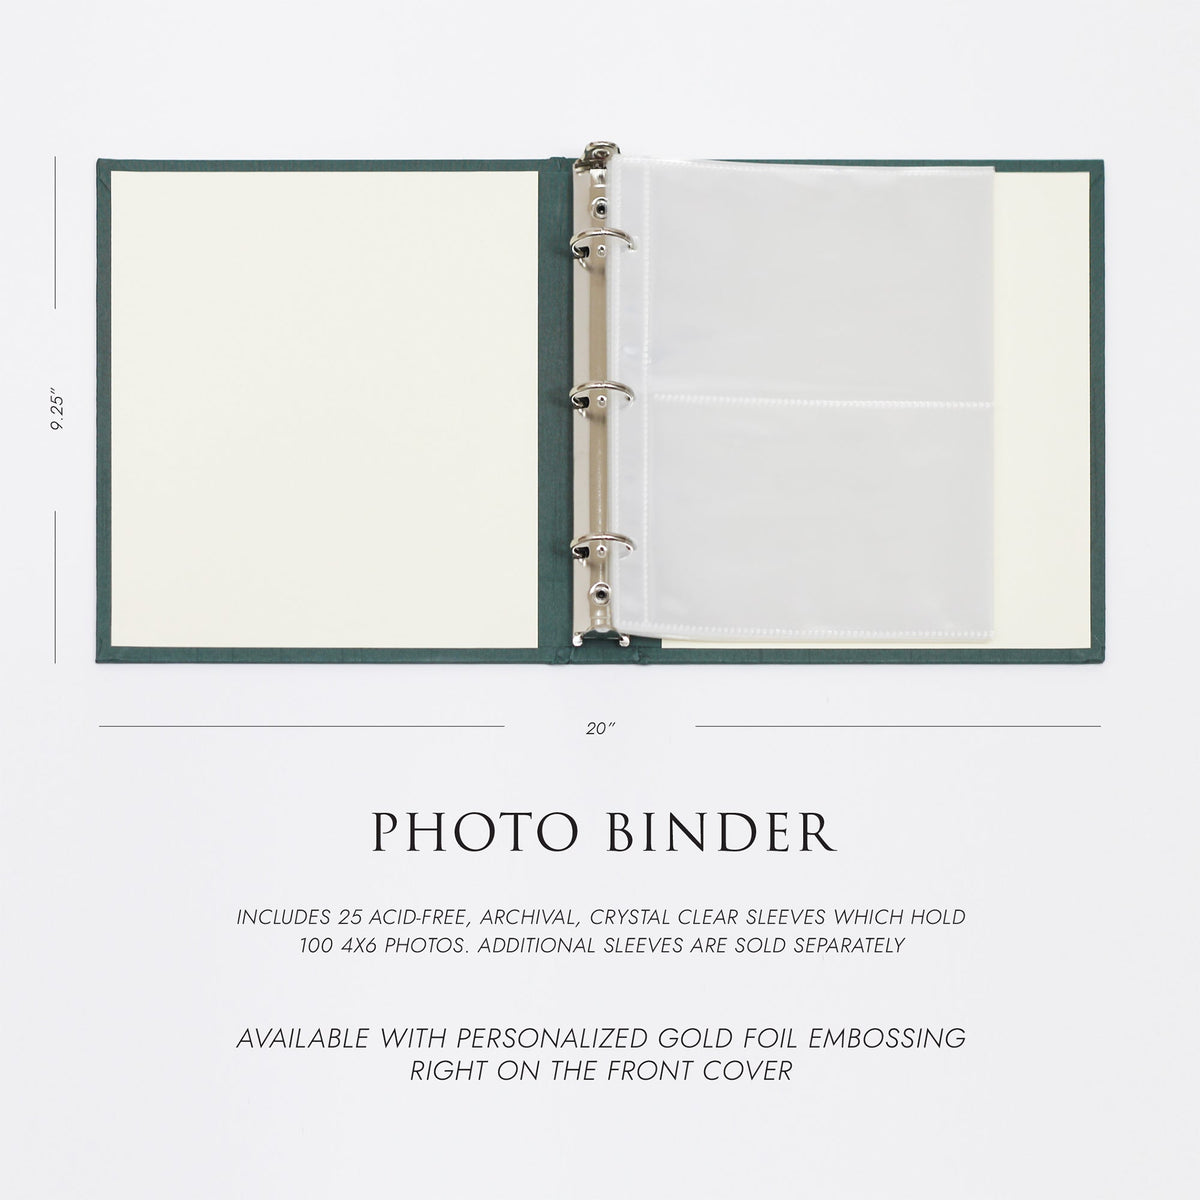 Medium Photo Binder For 4x6 Photos | Cover: Coral Cotton | Available Personalized